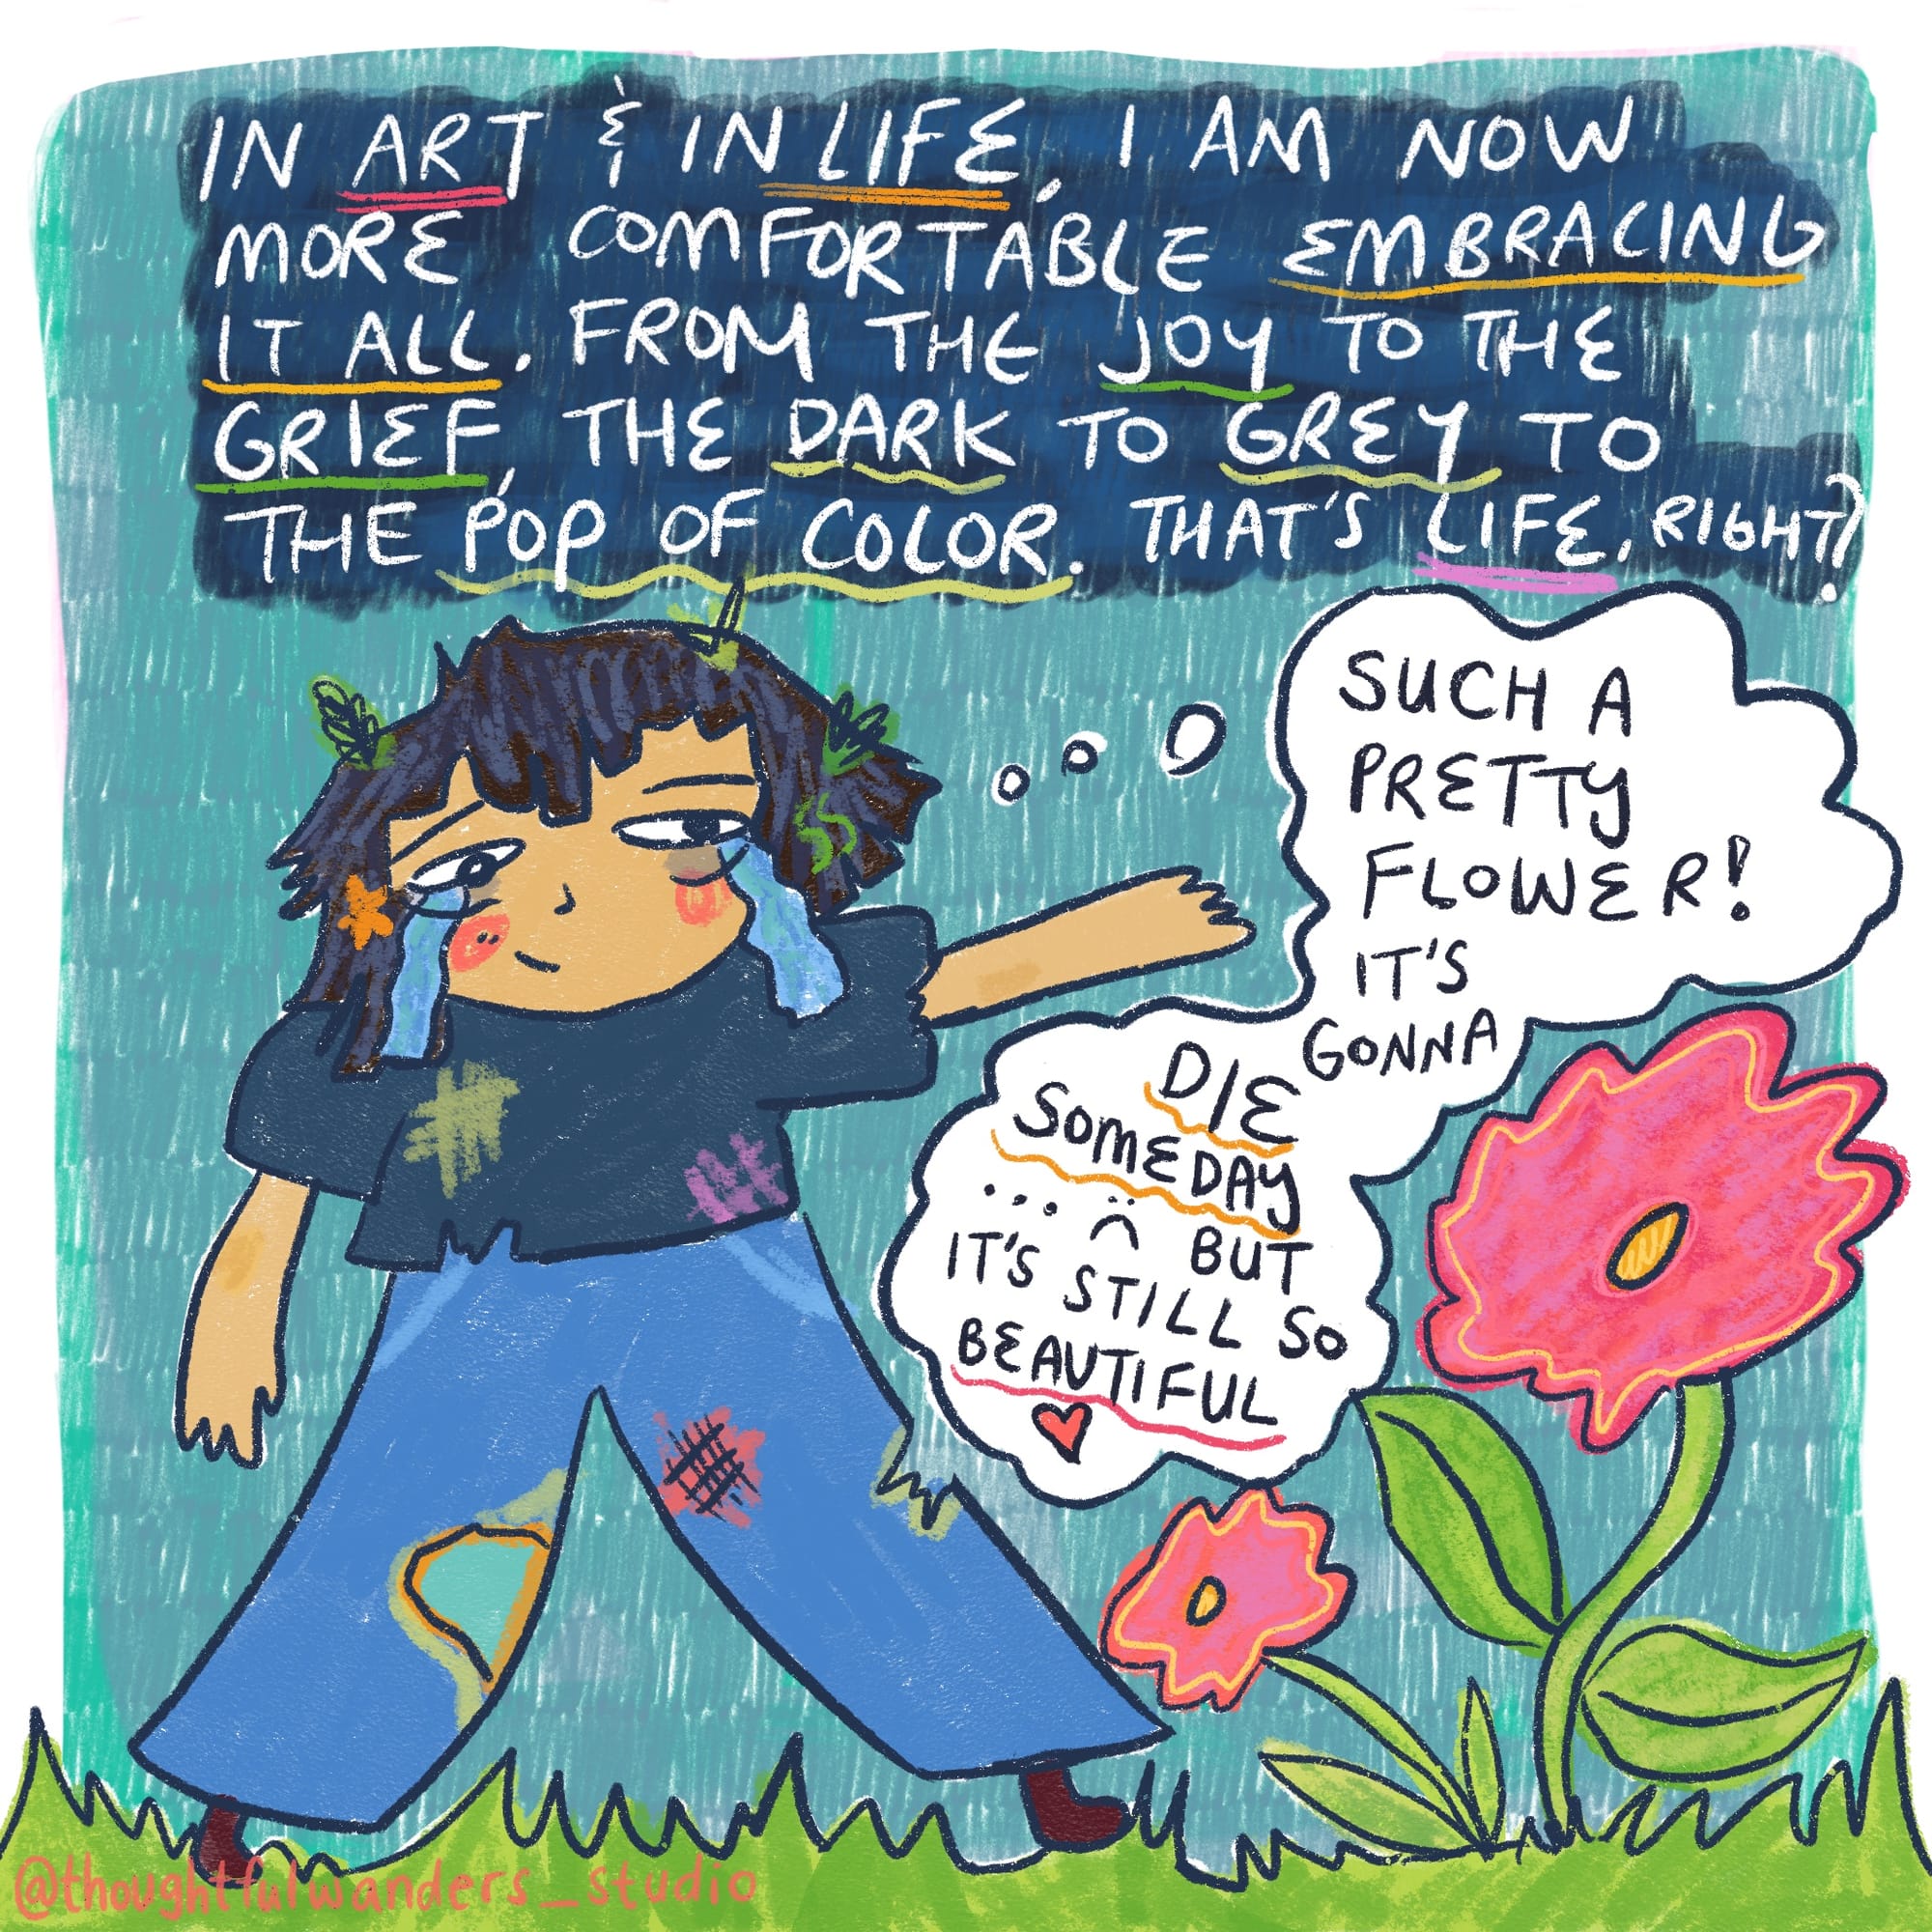 in art & in life, i am now more comfortable embracing it all. from the joy to the grief, the dark to grey to the pop of color. that's life right? comic me sees a flower and says "such a pretty flower! it's gonnad ie someday. : ( but it's still so beautiful